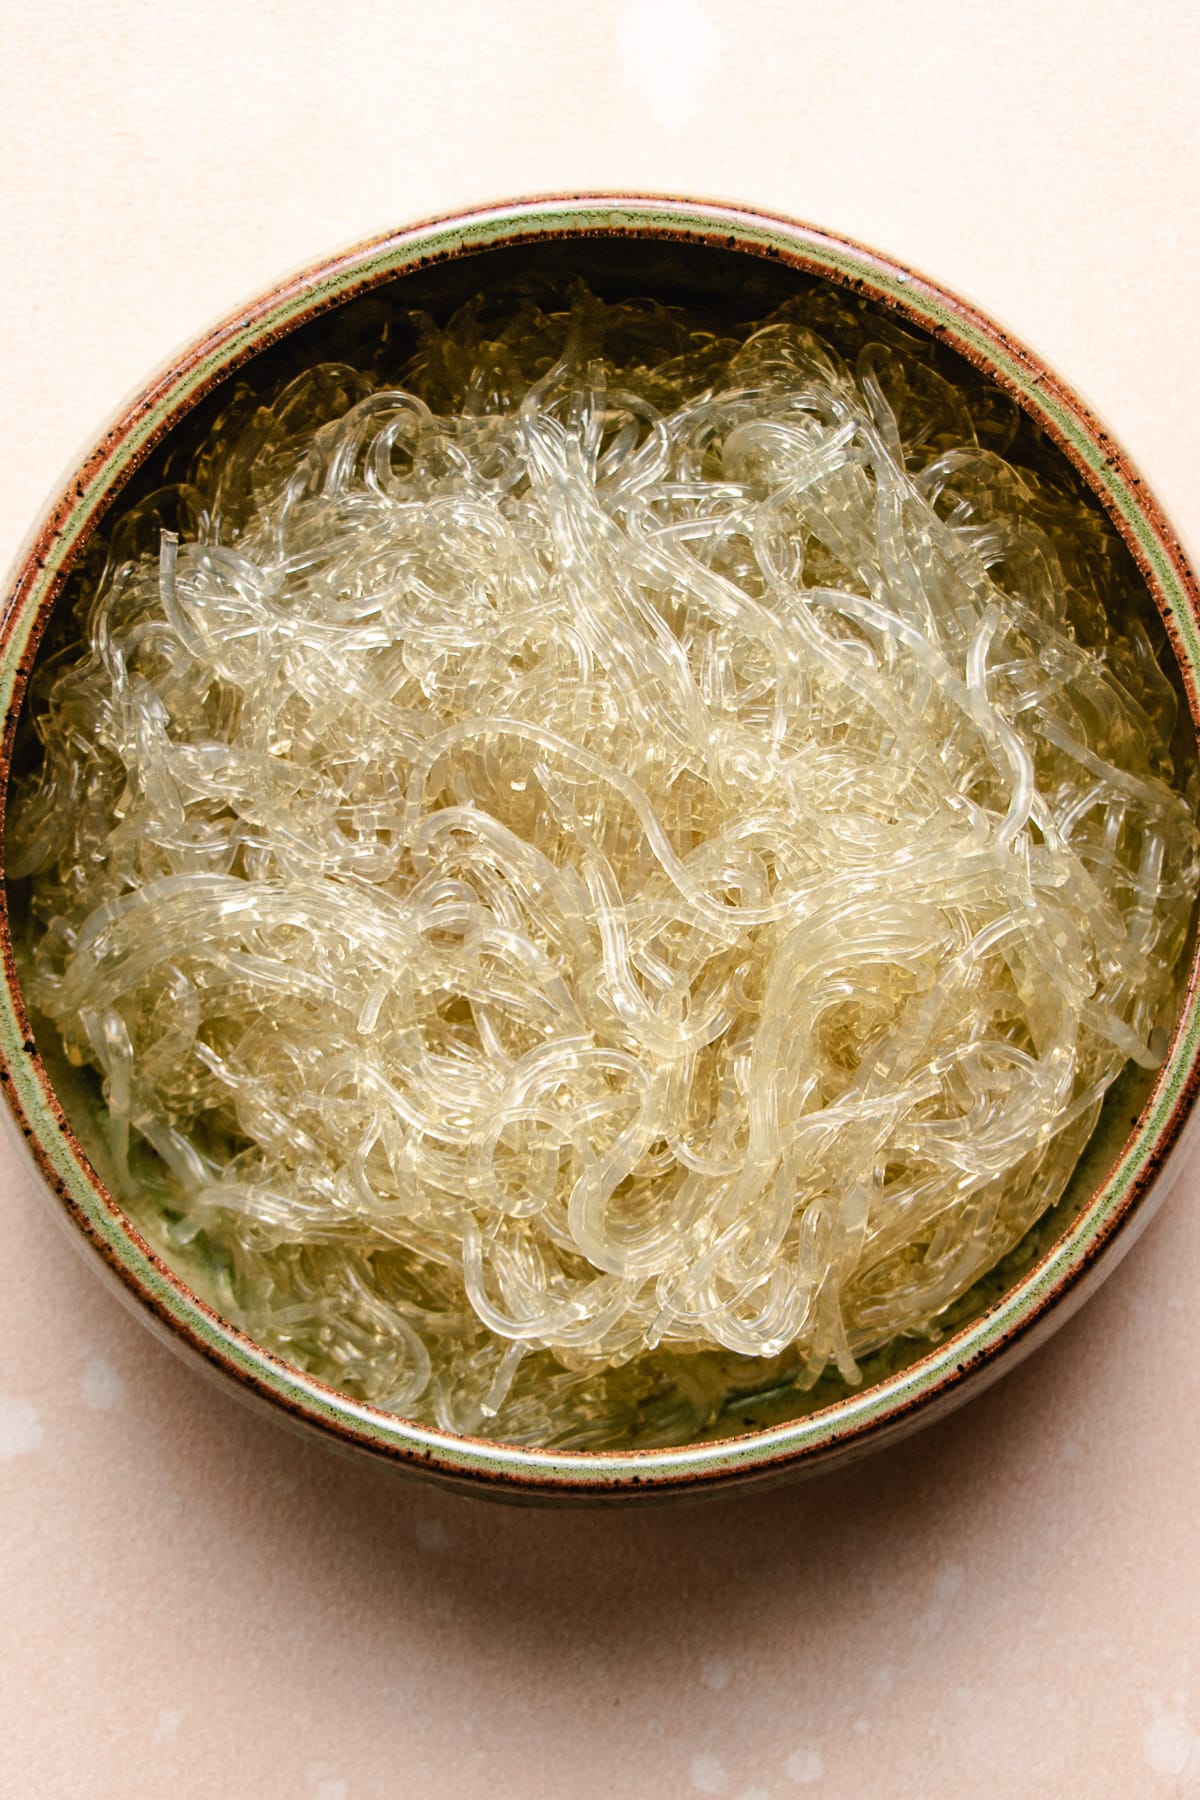 Photo shows kelp noodles after softened and ready to use in a plate